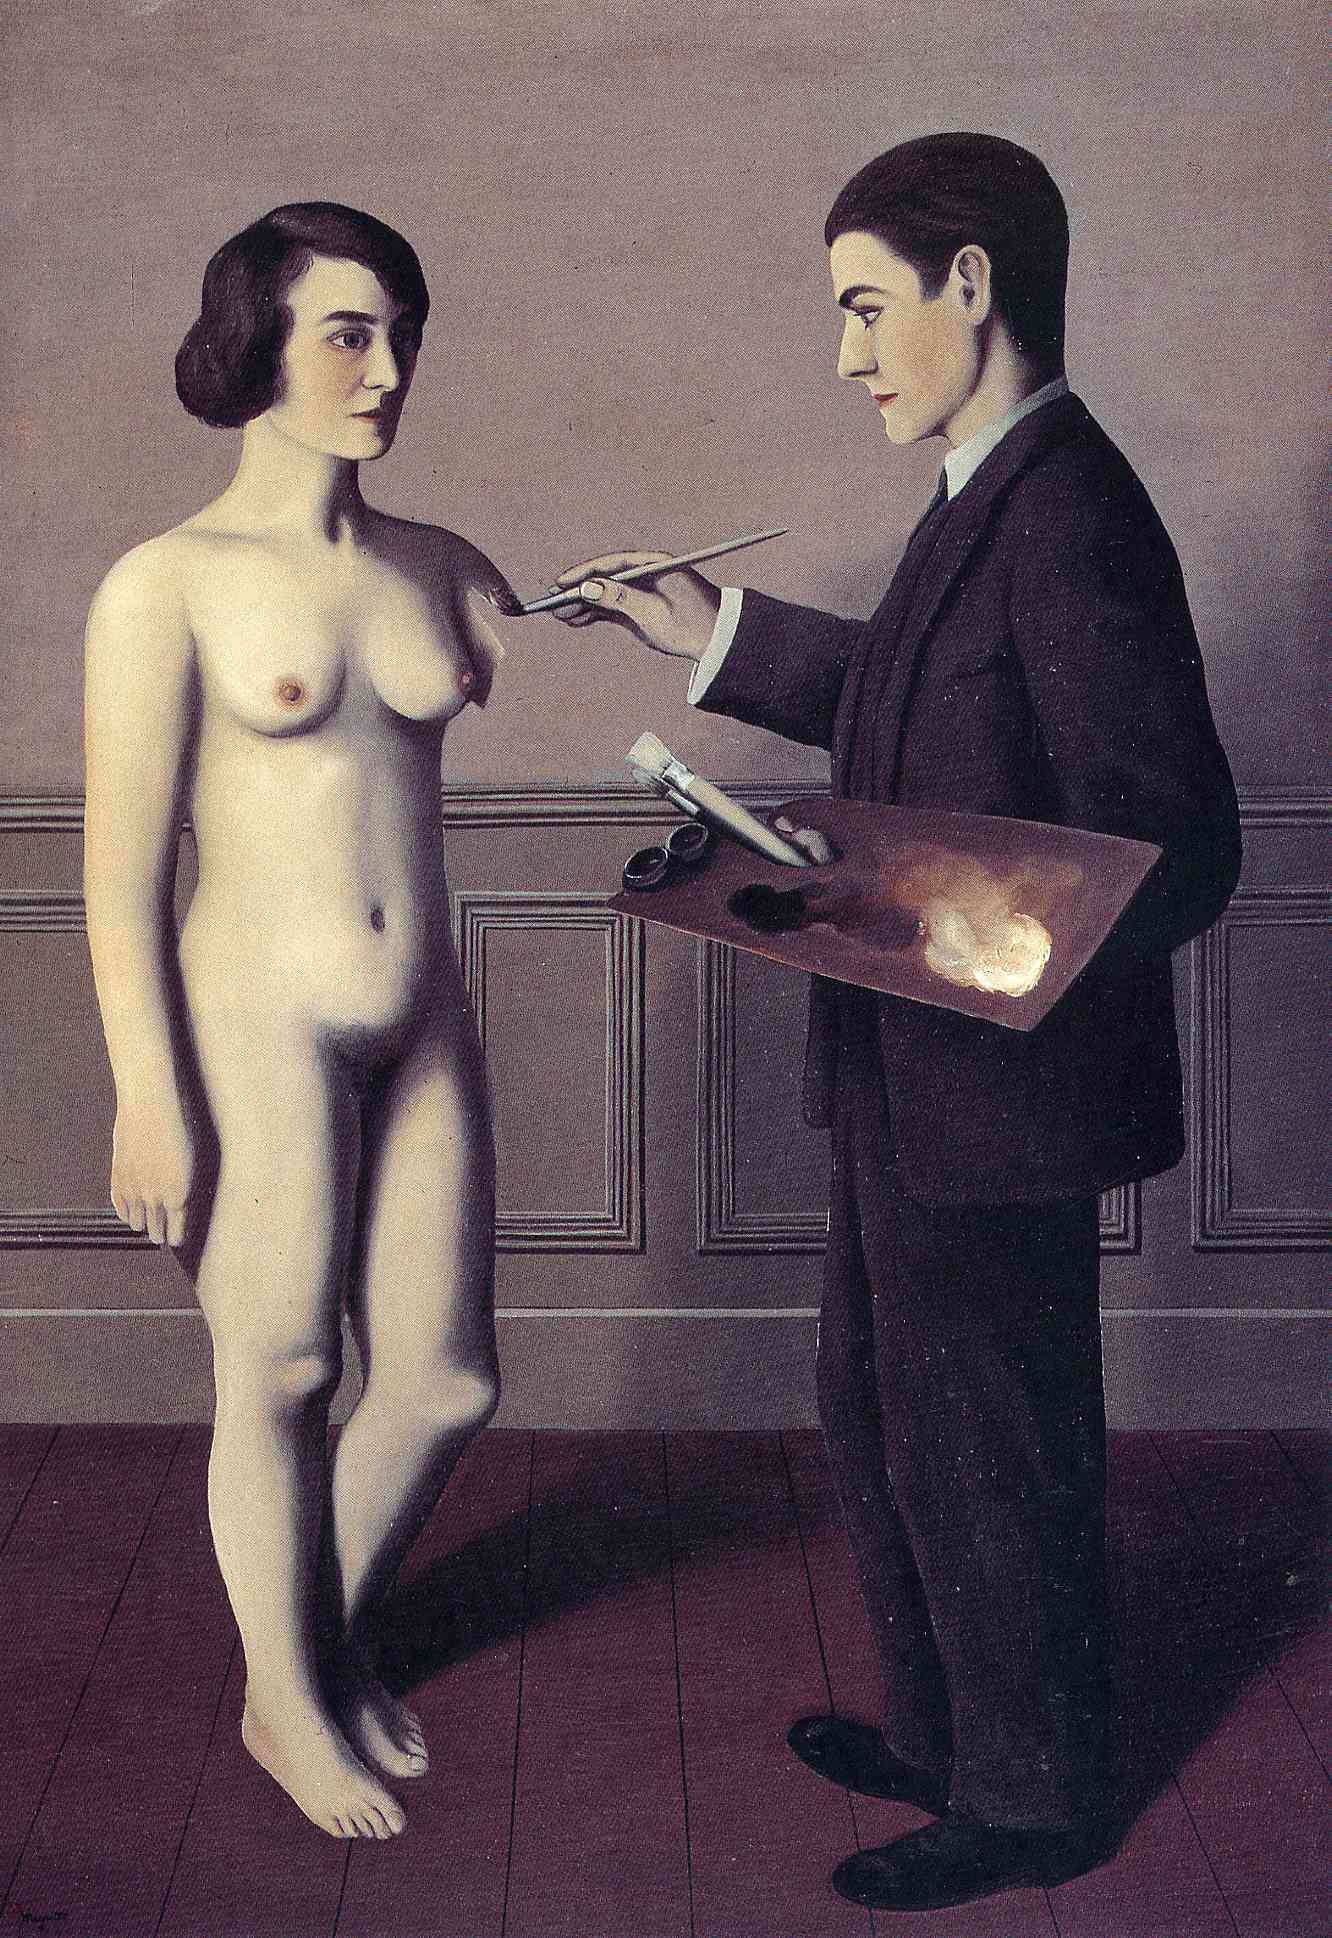 Tentative de l'impossible (Attempting the Impossible), Paris, 1928  Oil on canvas, 45 11/16 x 31 7/8 inches  Lent by the Toyota Municipal Museum of Art, Japan 